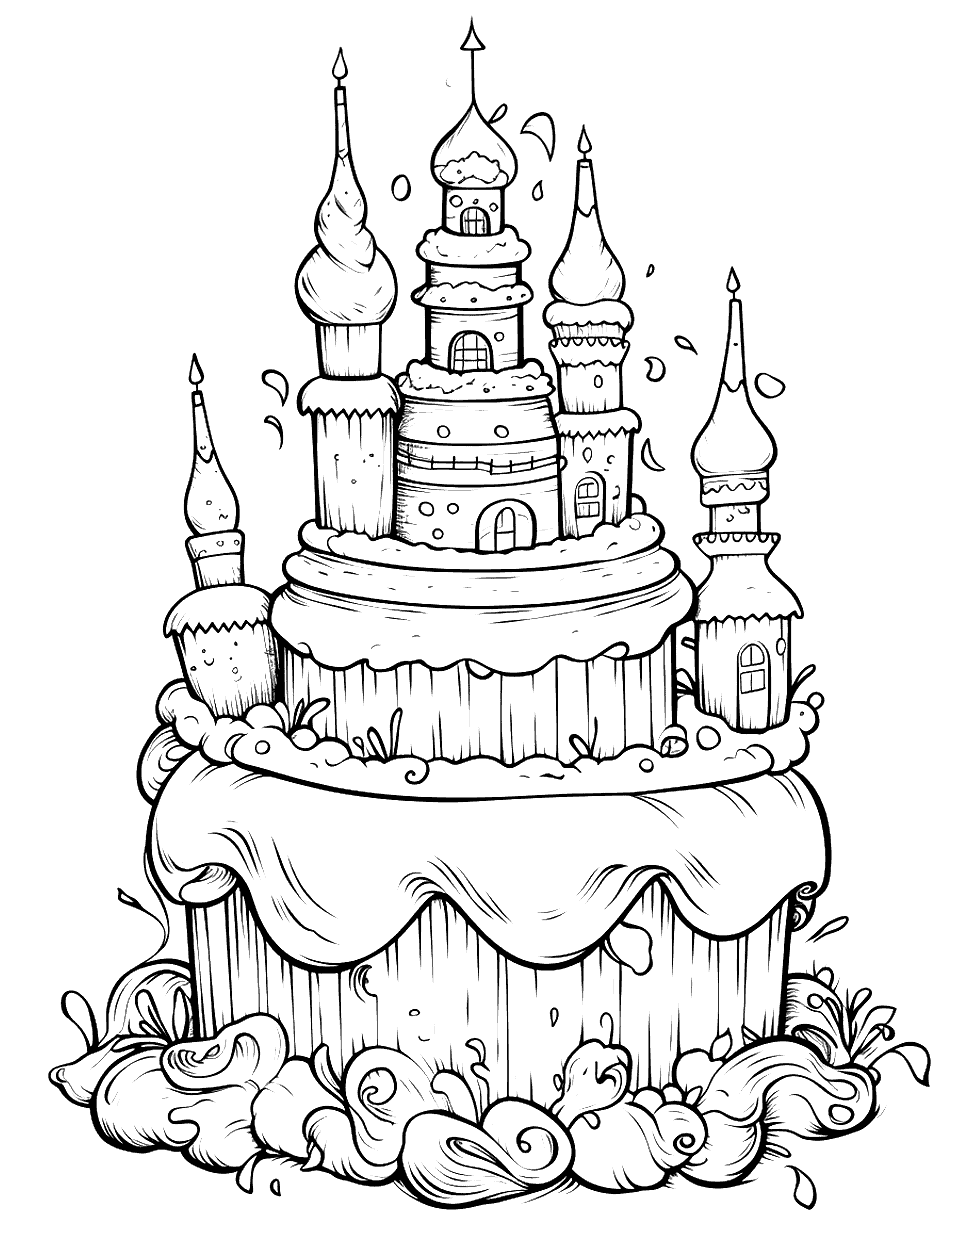 Enchanted Castle Cake Coloring Page - A cake designed like a magical castle.